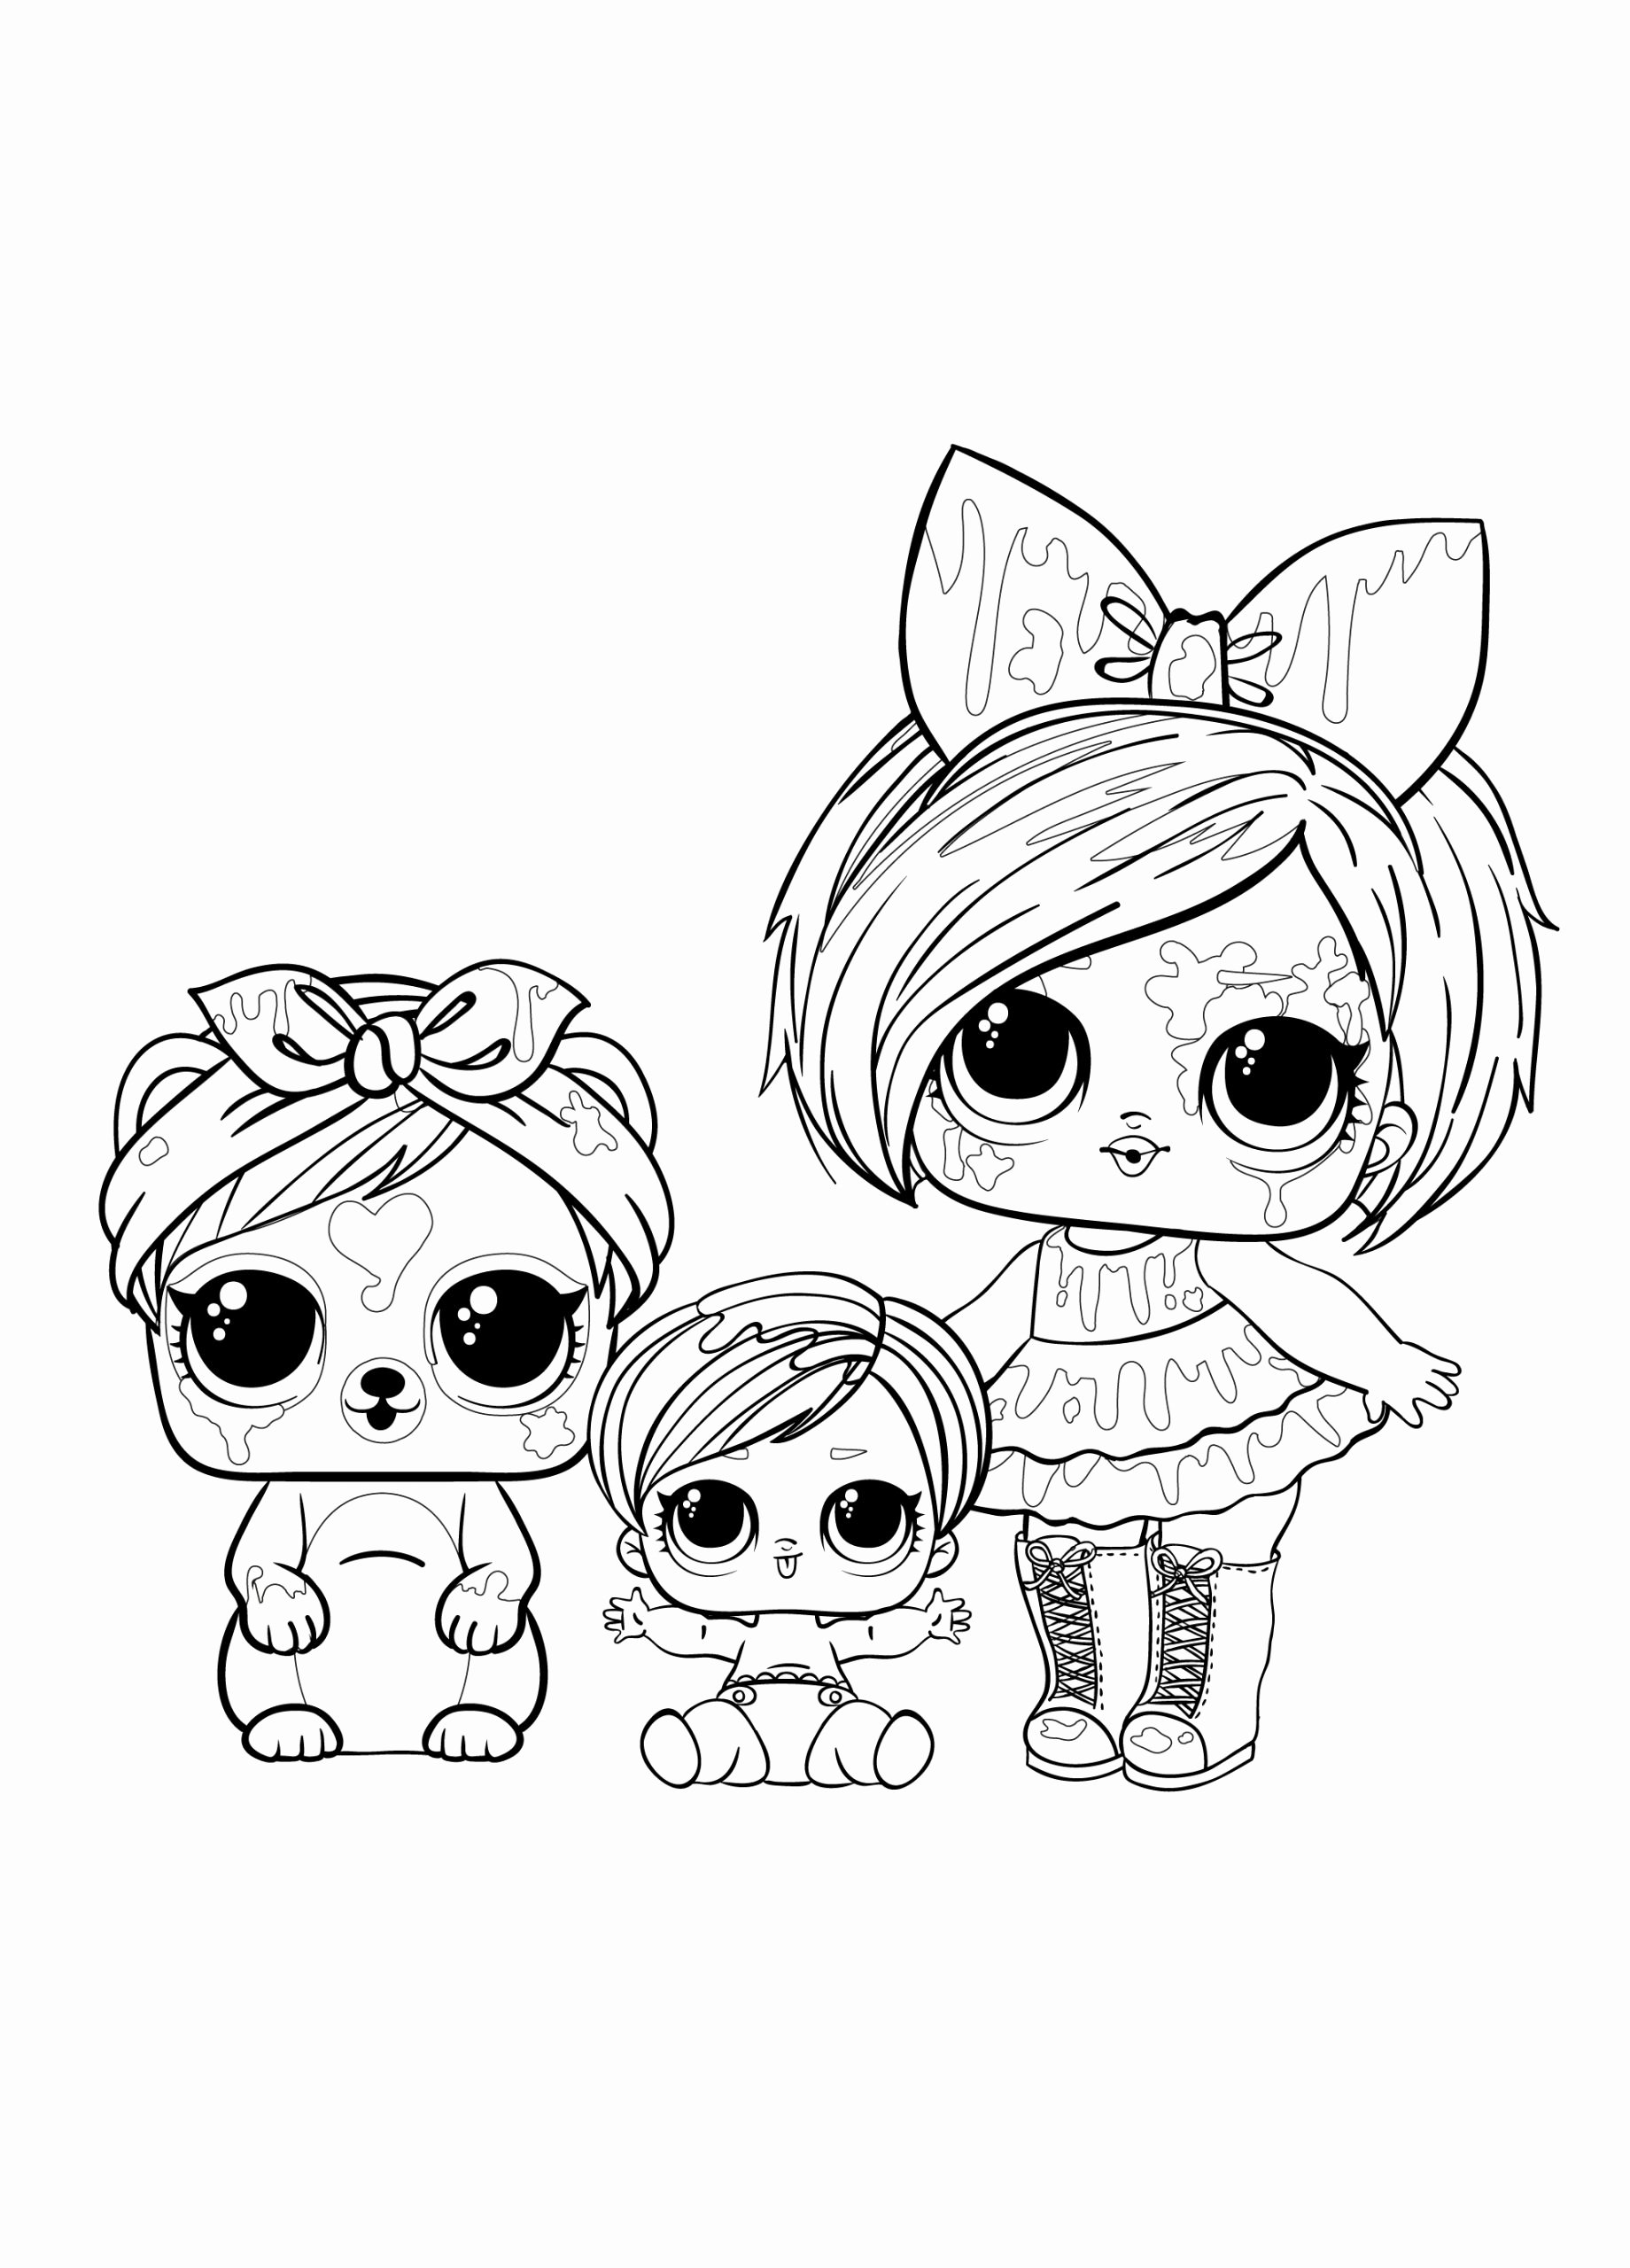 Baby Alive Coloring Page Unique Coloring Pages Coloring Ideas Lol ...